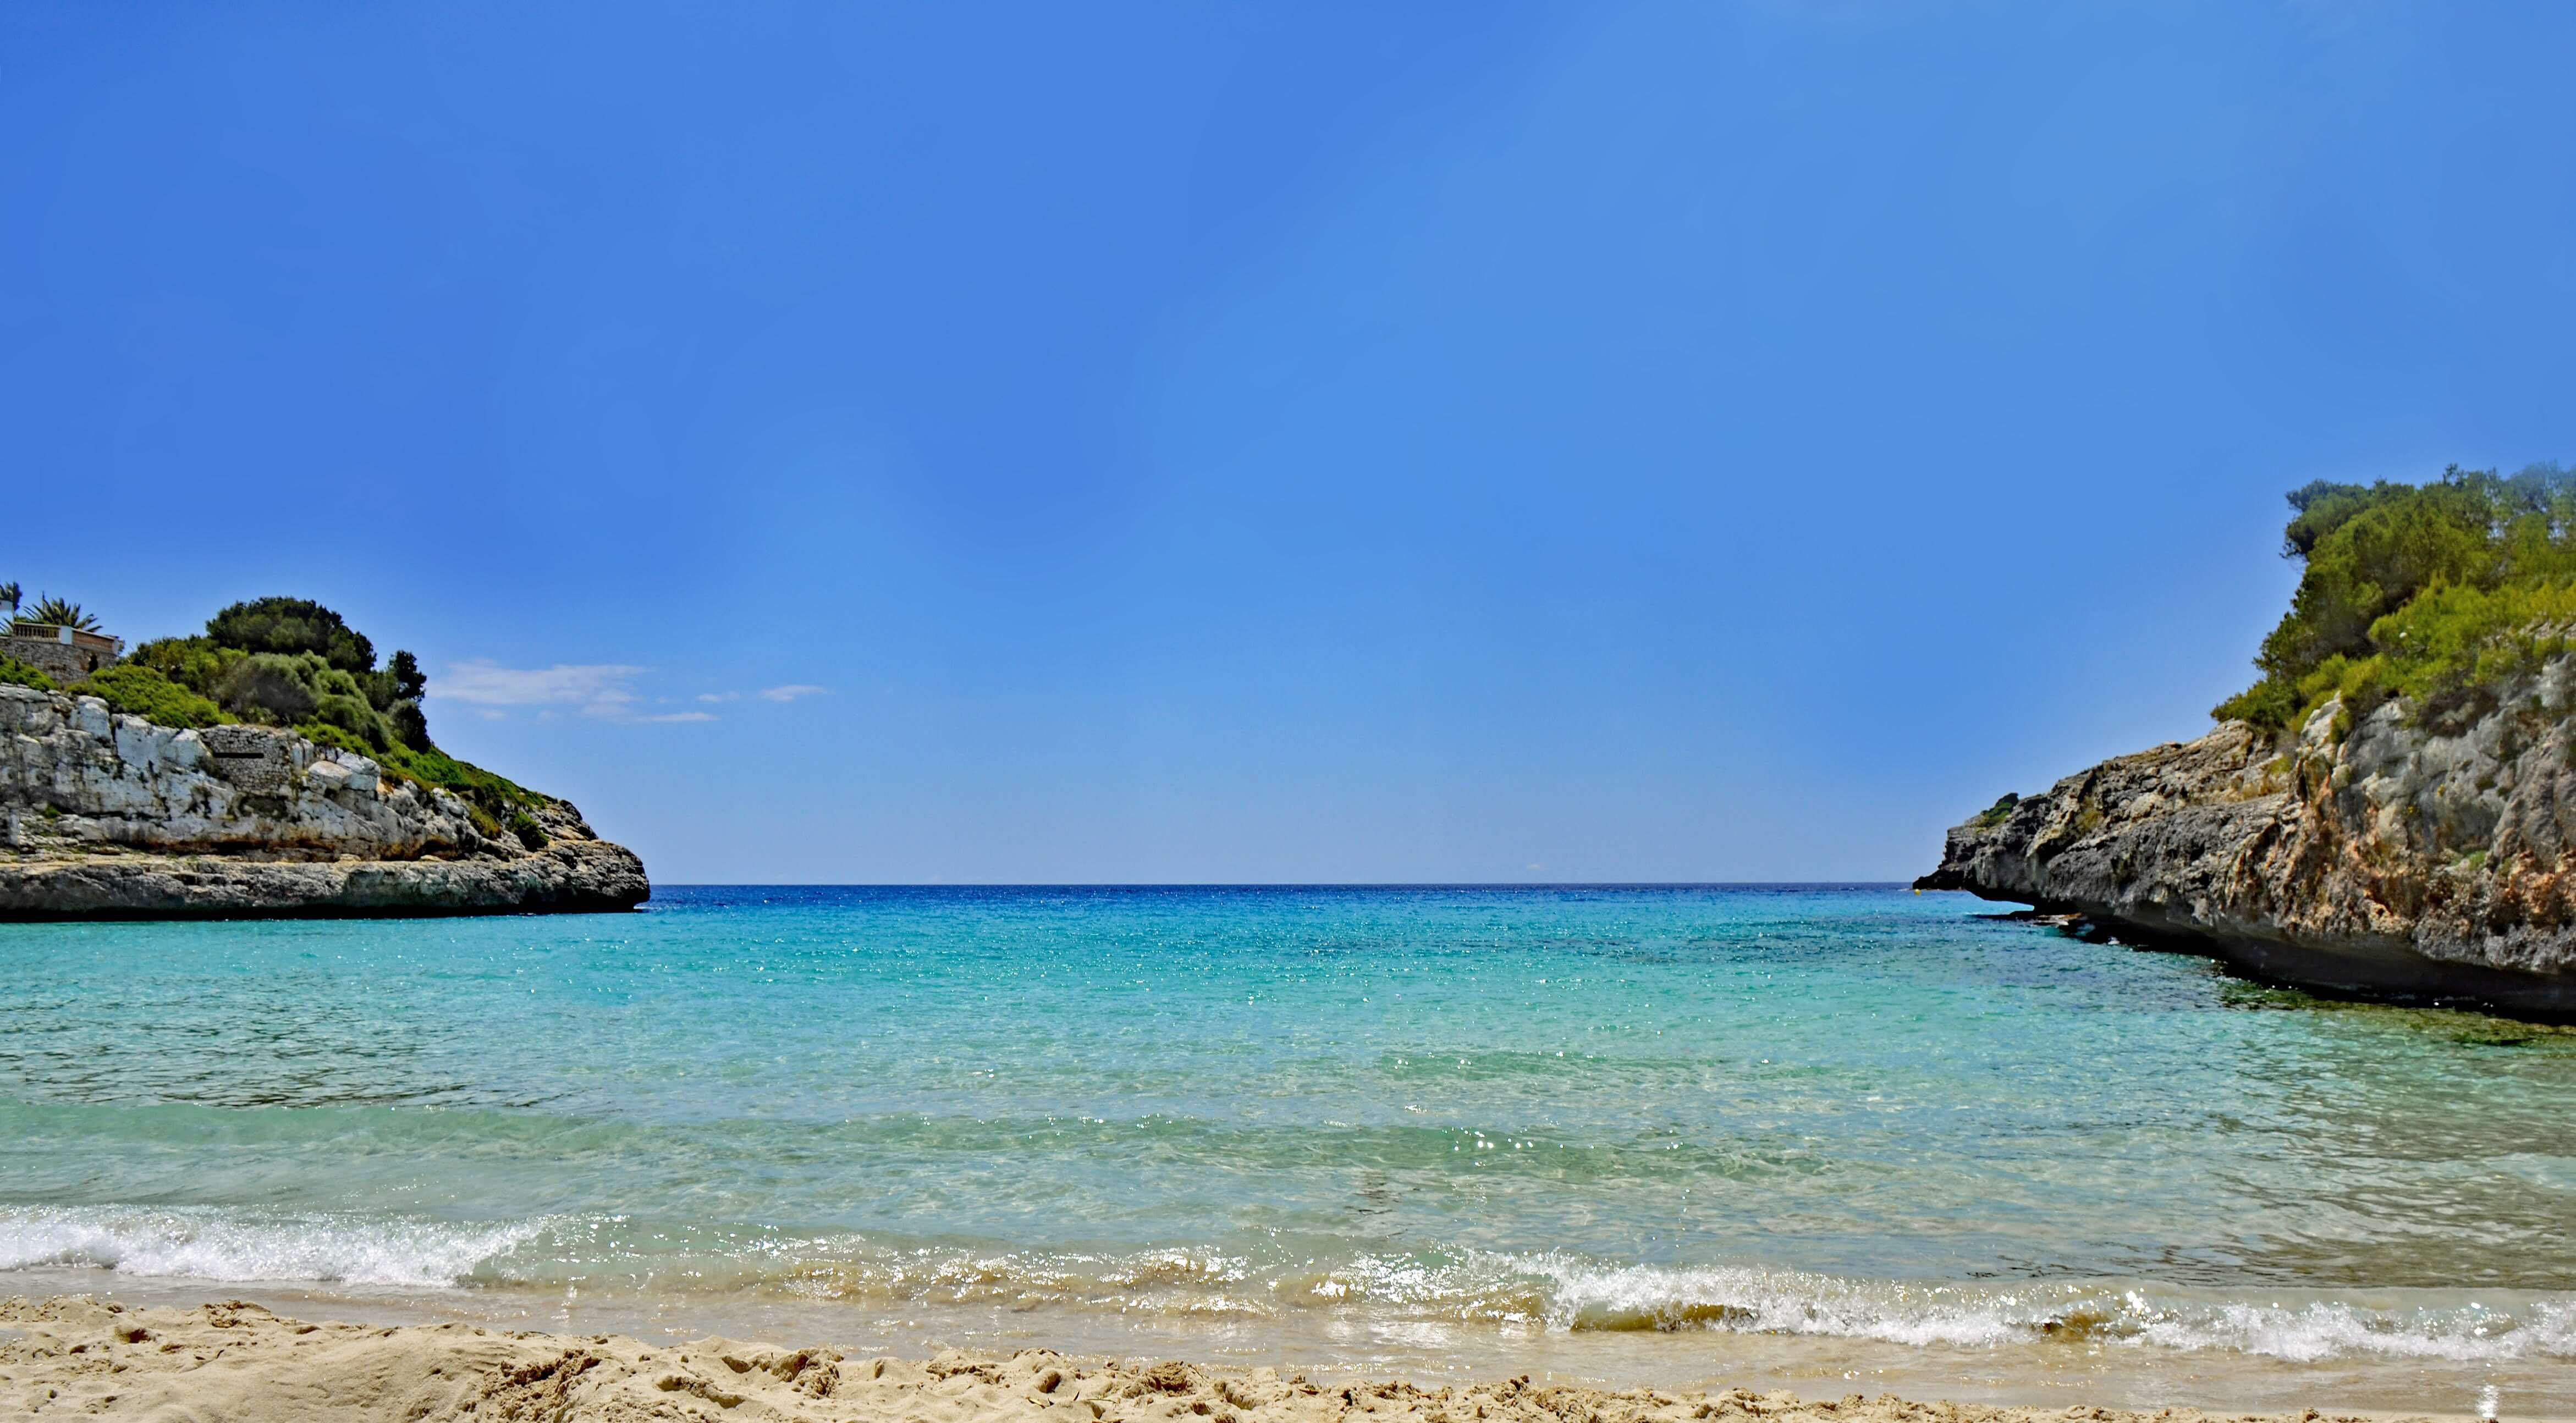 A sandy beach with blue water and a rocky cliff.